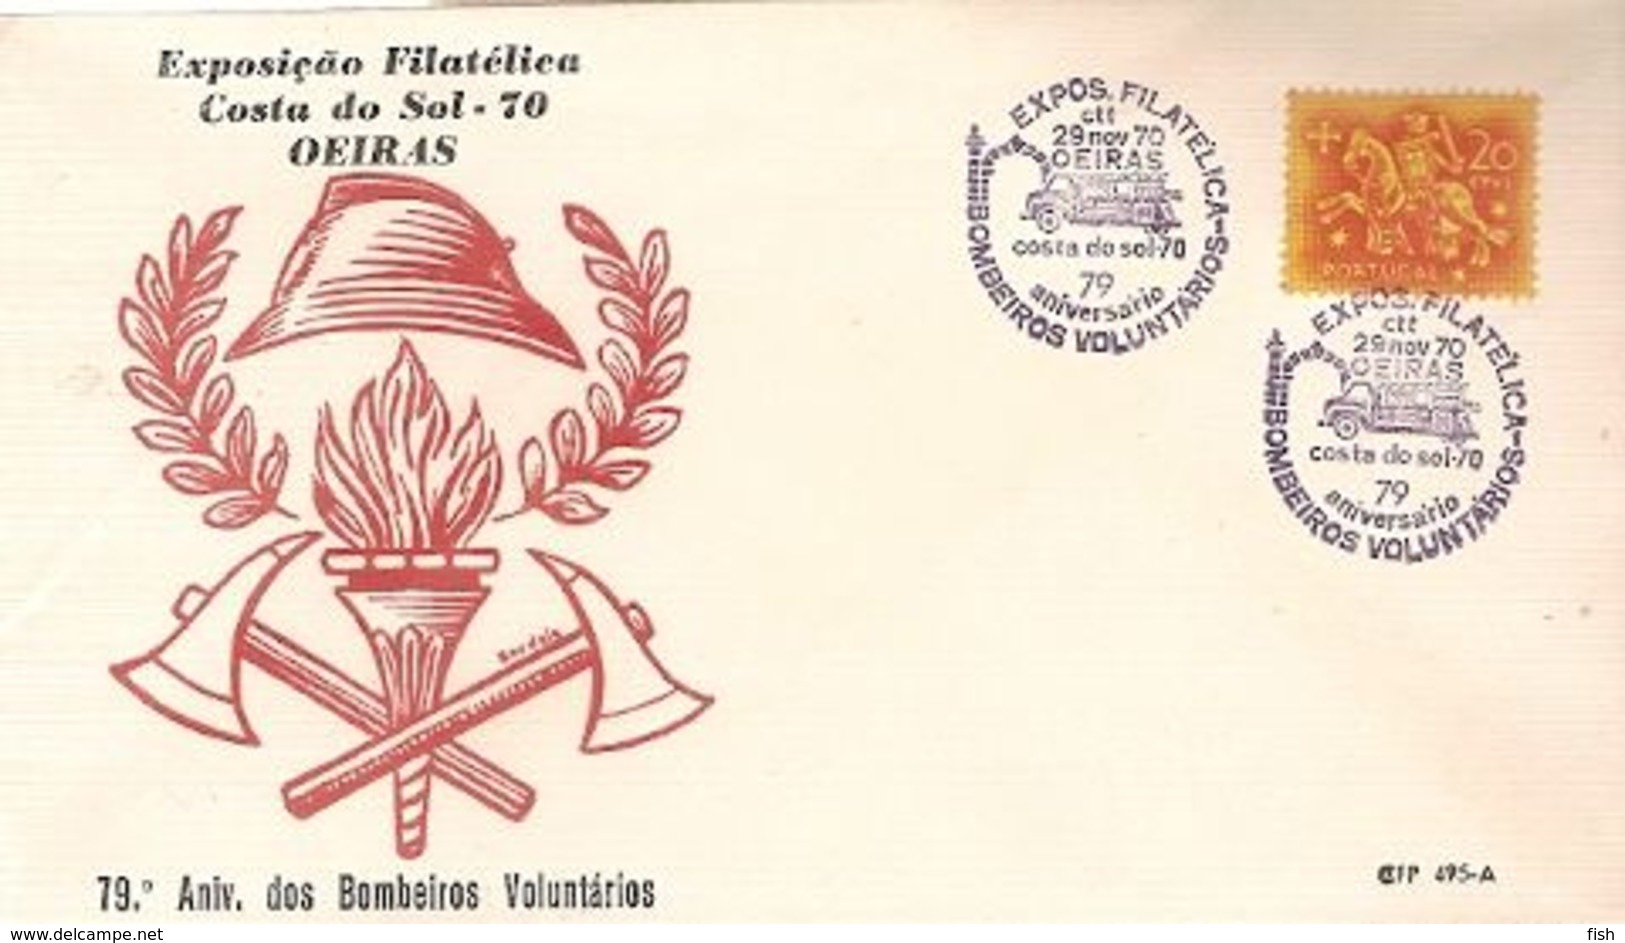 Portugal & FDC 79 Years Of Volunteer Firefighters, Expo. Philatelic Costa Do Sol, Oeiras 1970 (6868) - FDC